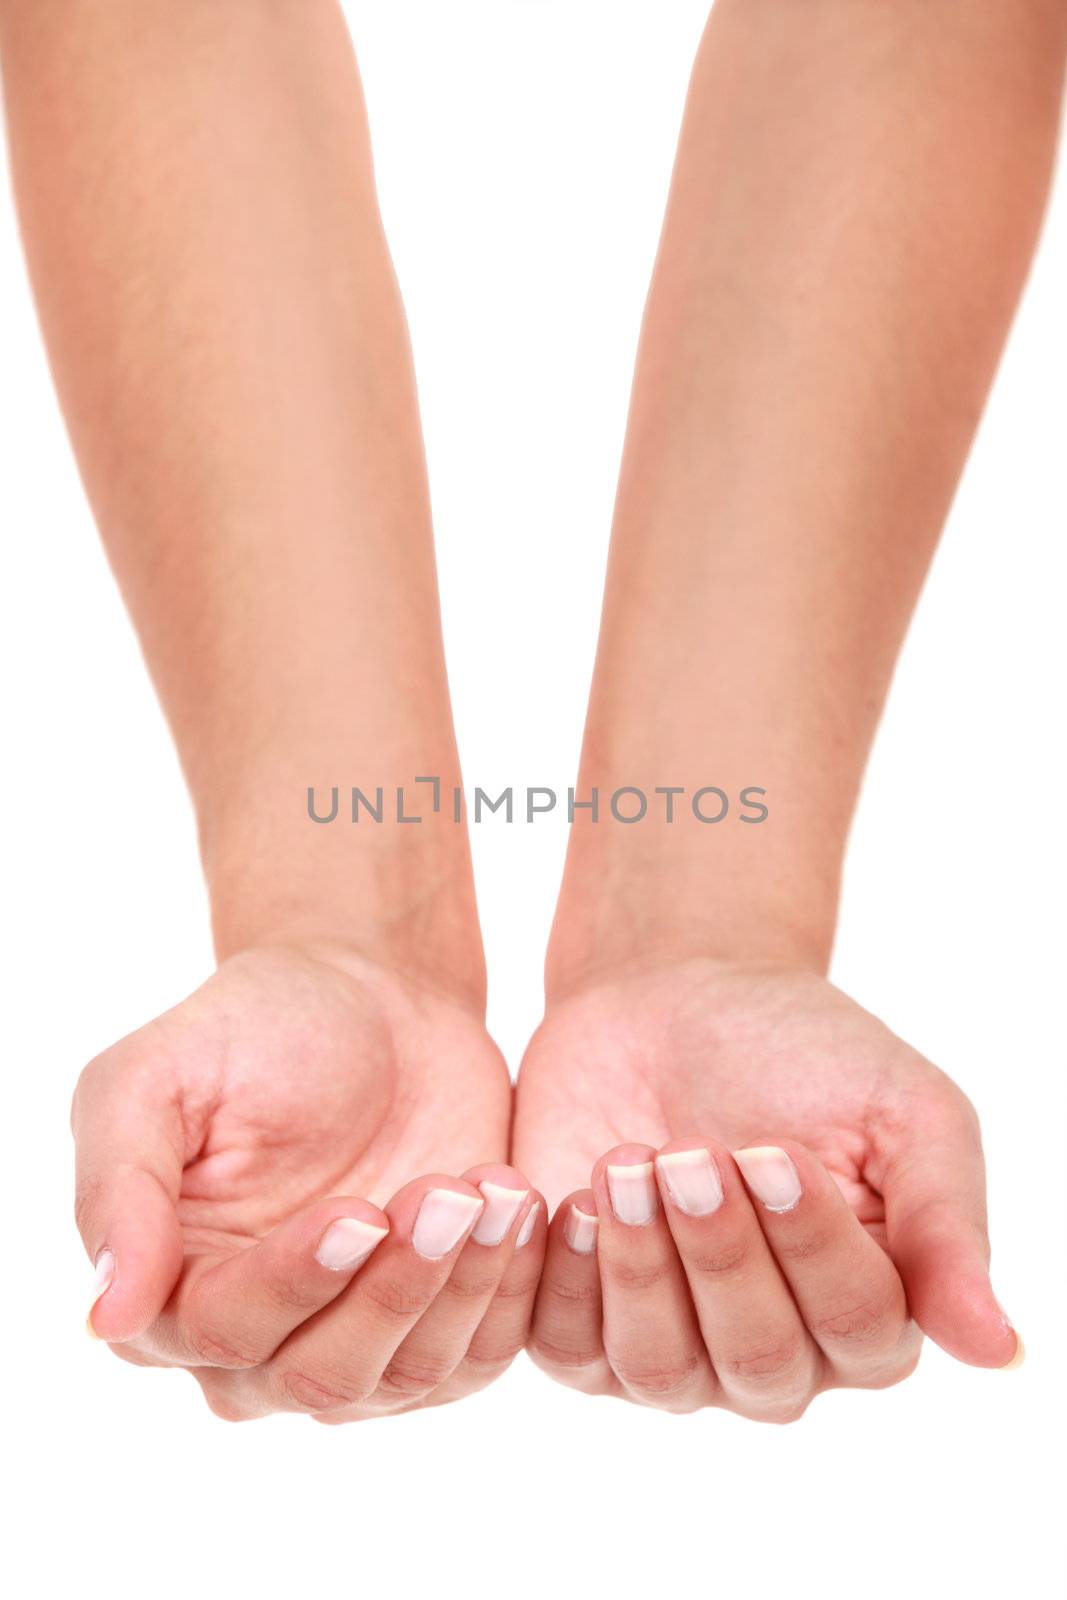 Hands in cupping position